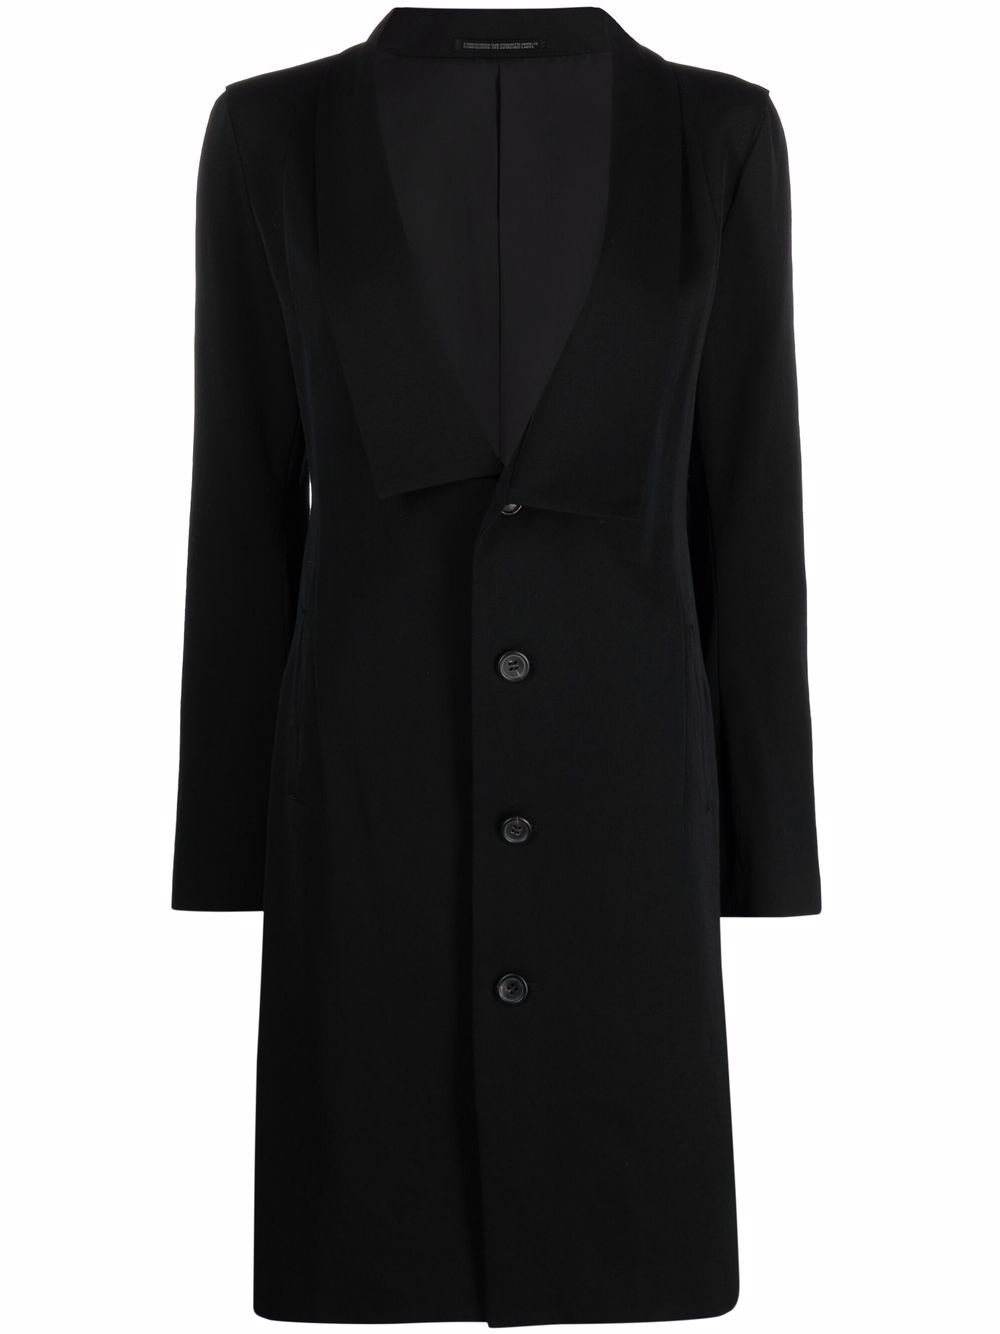 2000s single-breasted wool coat